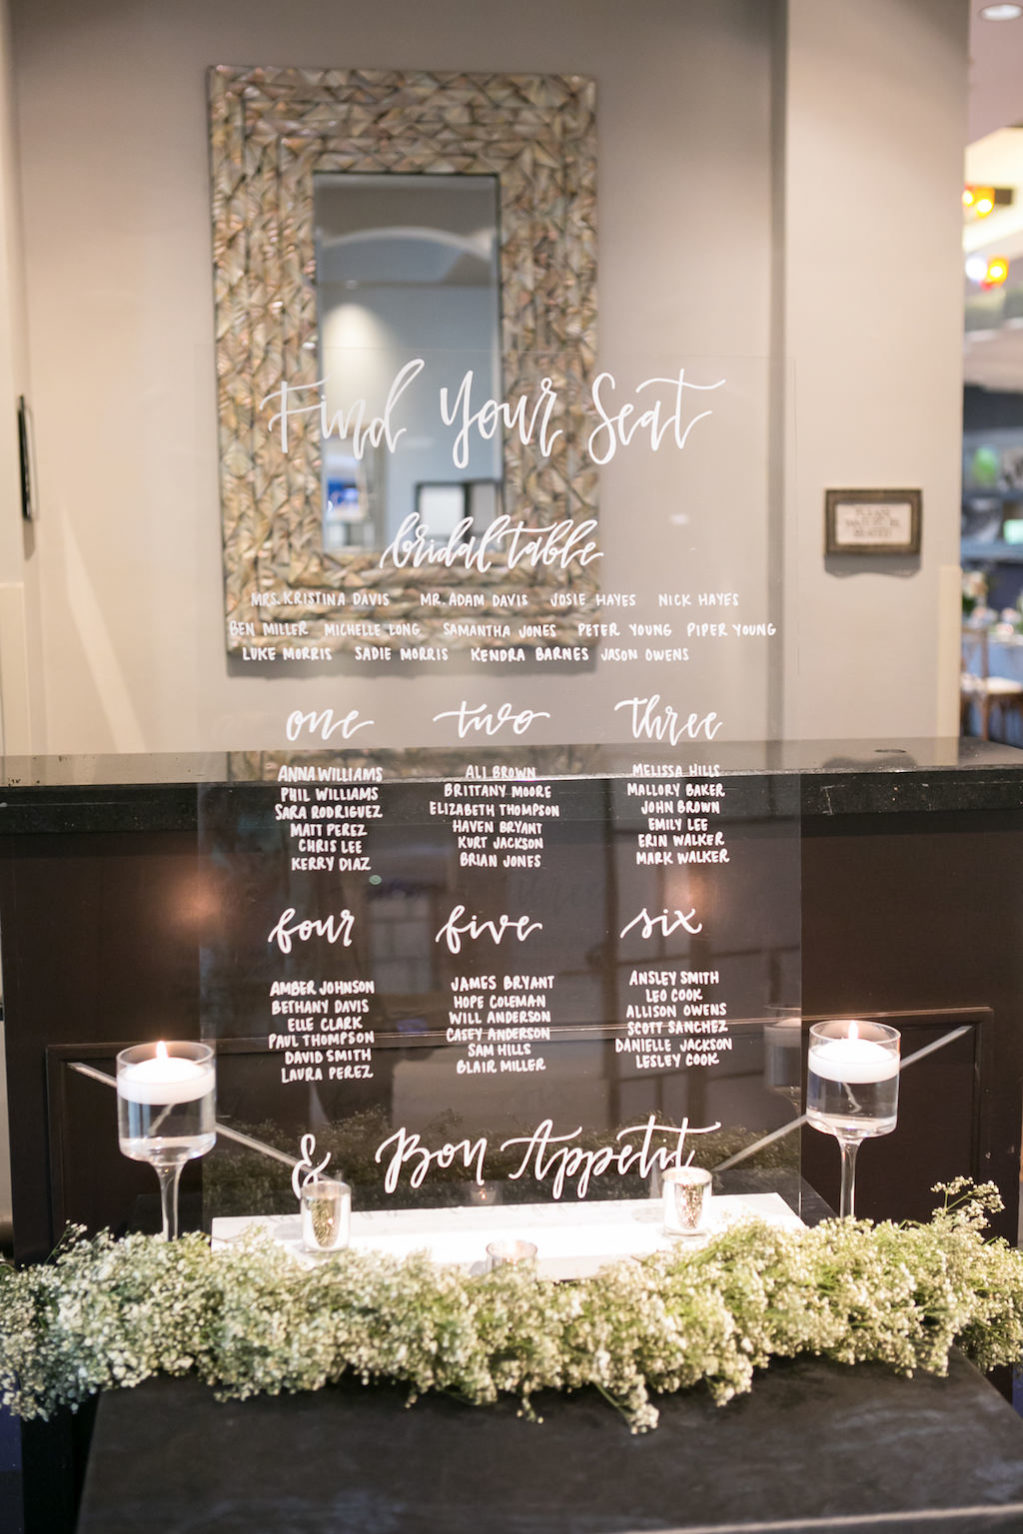 Wedding Reception Decor, Clear Acrylic Wedding Seating Chart with White Font, White Baby's Breathe Garland, Glass Candlesticks with Floating Candles | Tampa Bay Photographer Carrie Wildes Photography | Wedding Planner Coastal Coordinating | Rentals and Florist Gabro Event Services